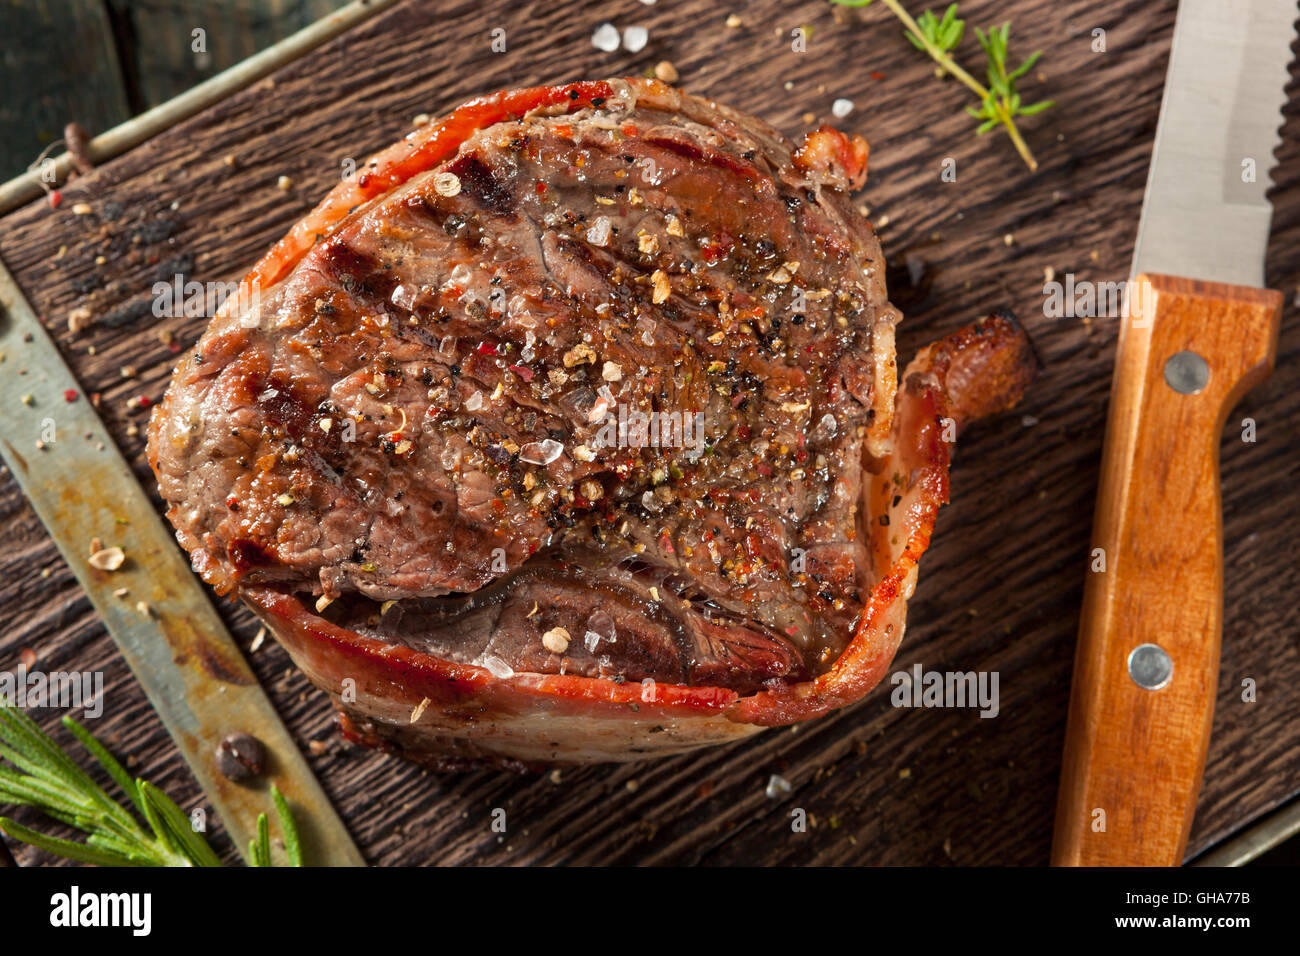 Organic Grass Fed Bacon Wrapped Sirloin Steak with Herbs Stock Photo